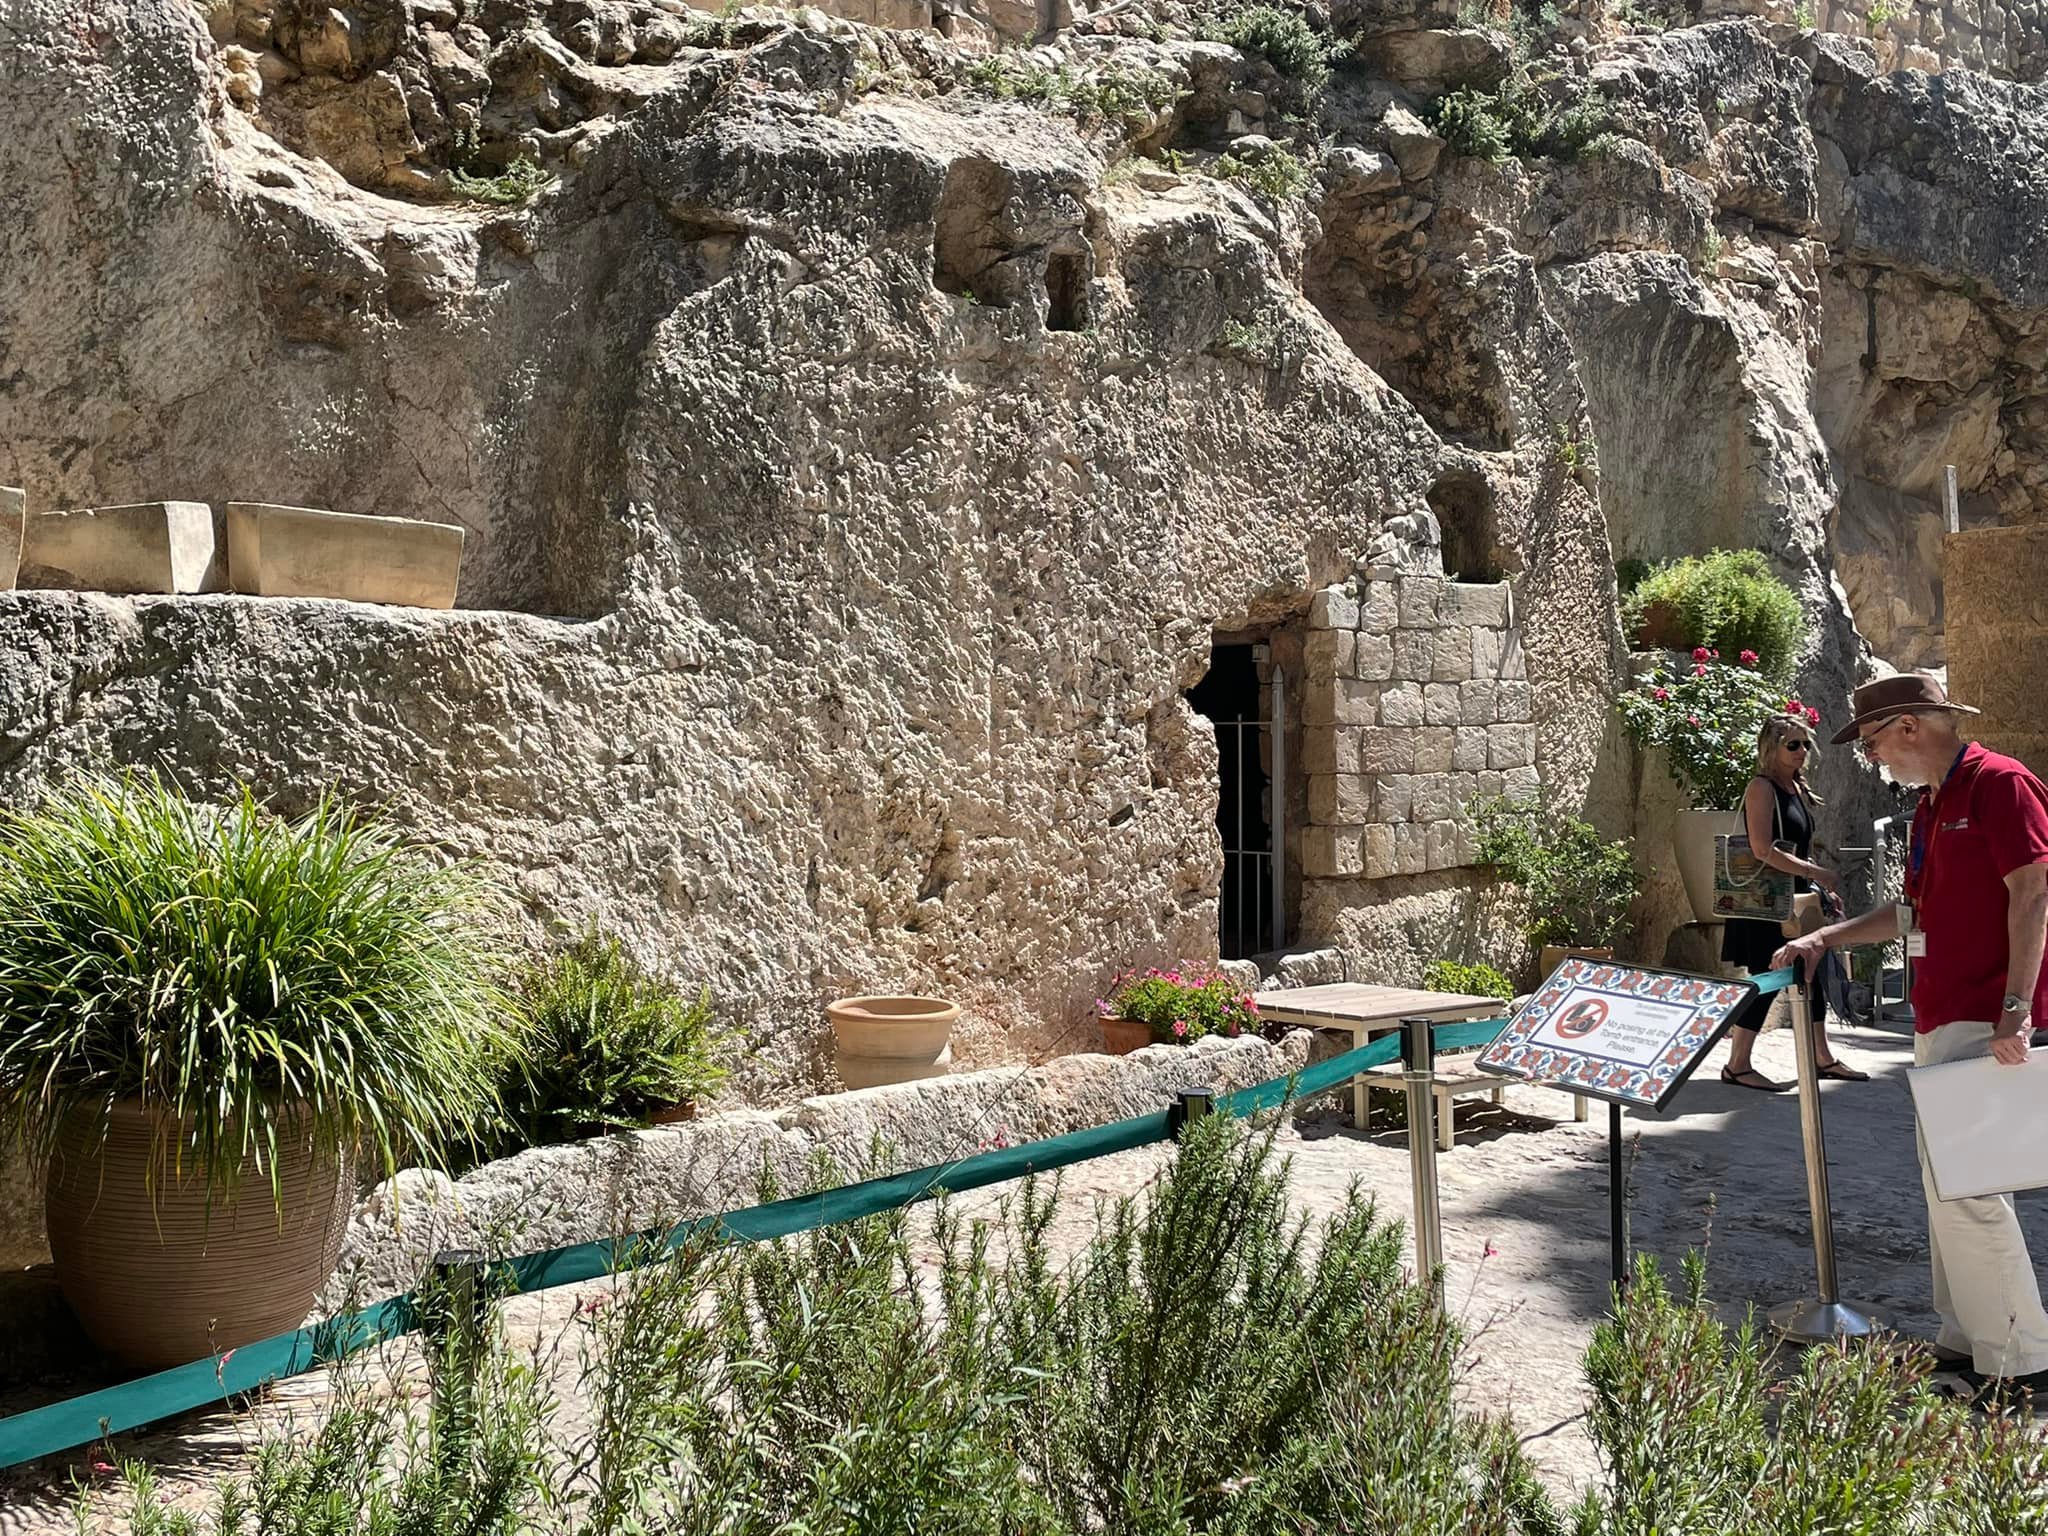  This is the garden tomb, and it looks like a very likely spot and fits the description that we have in the gospels. 